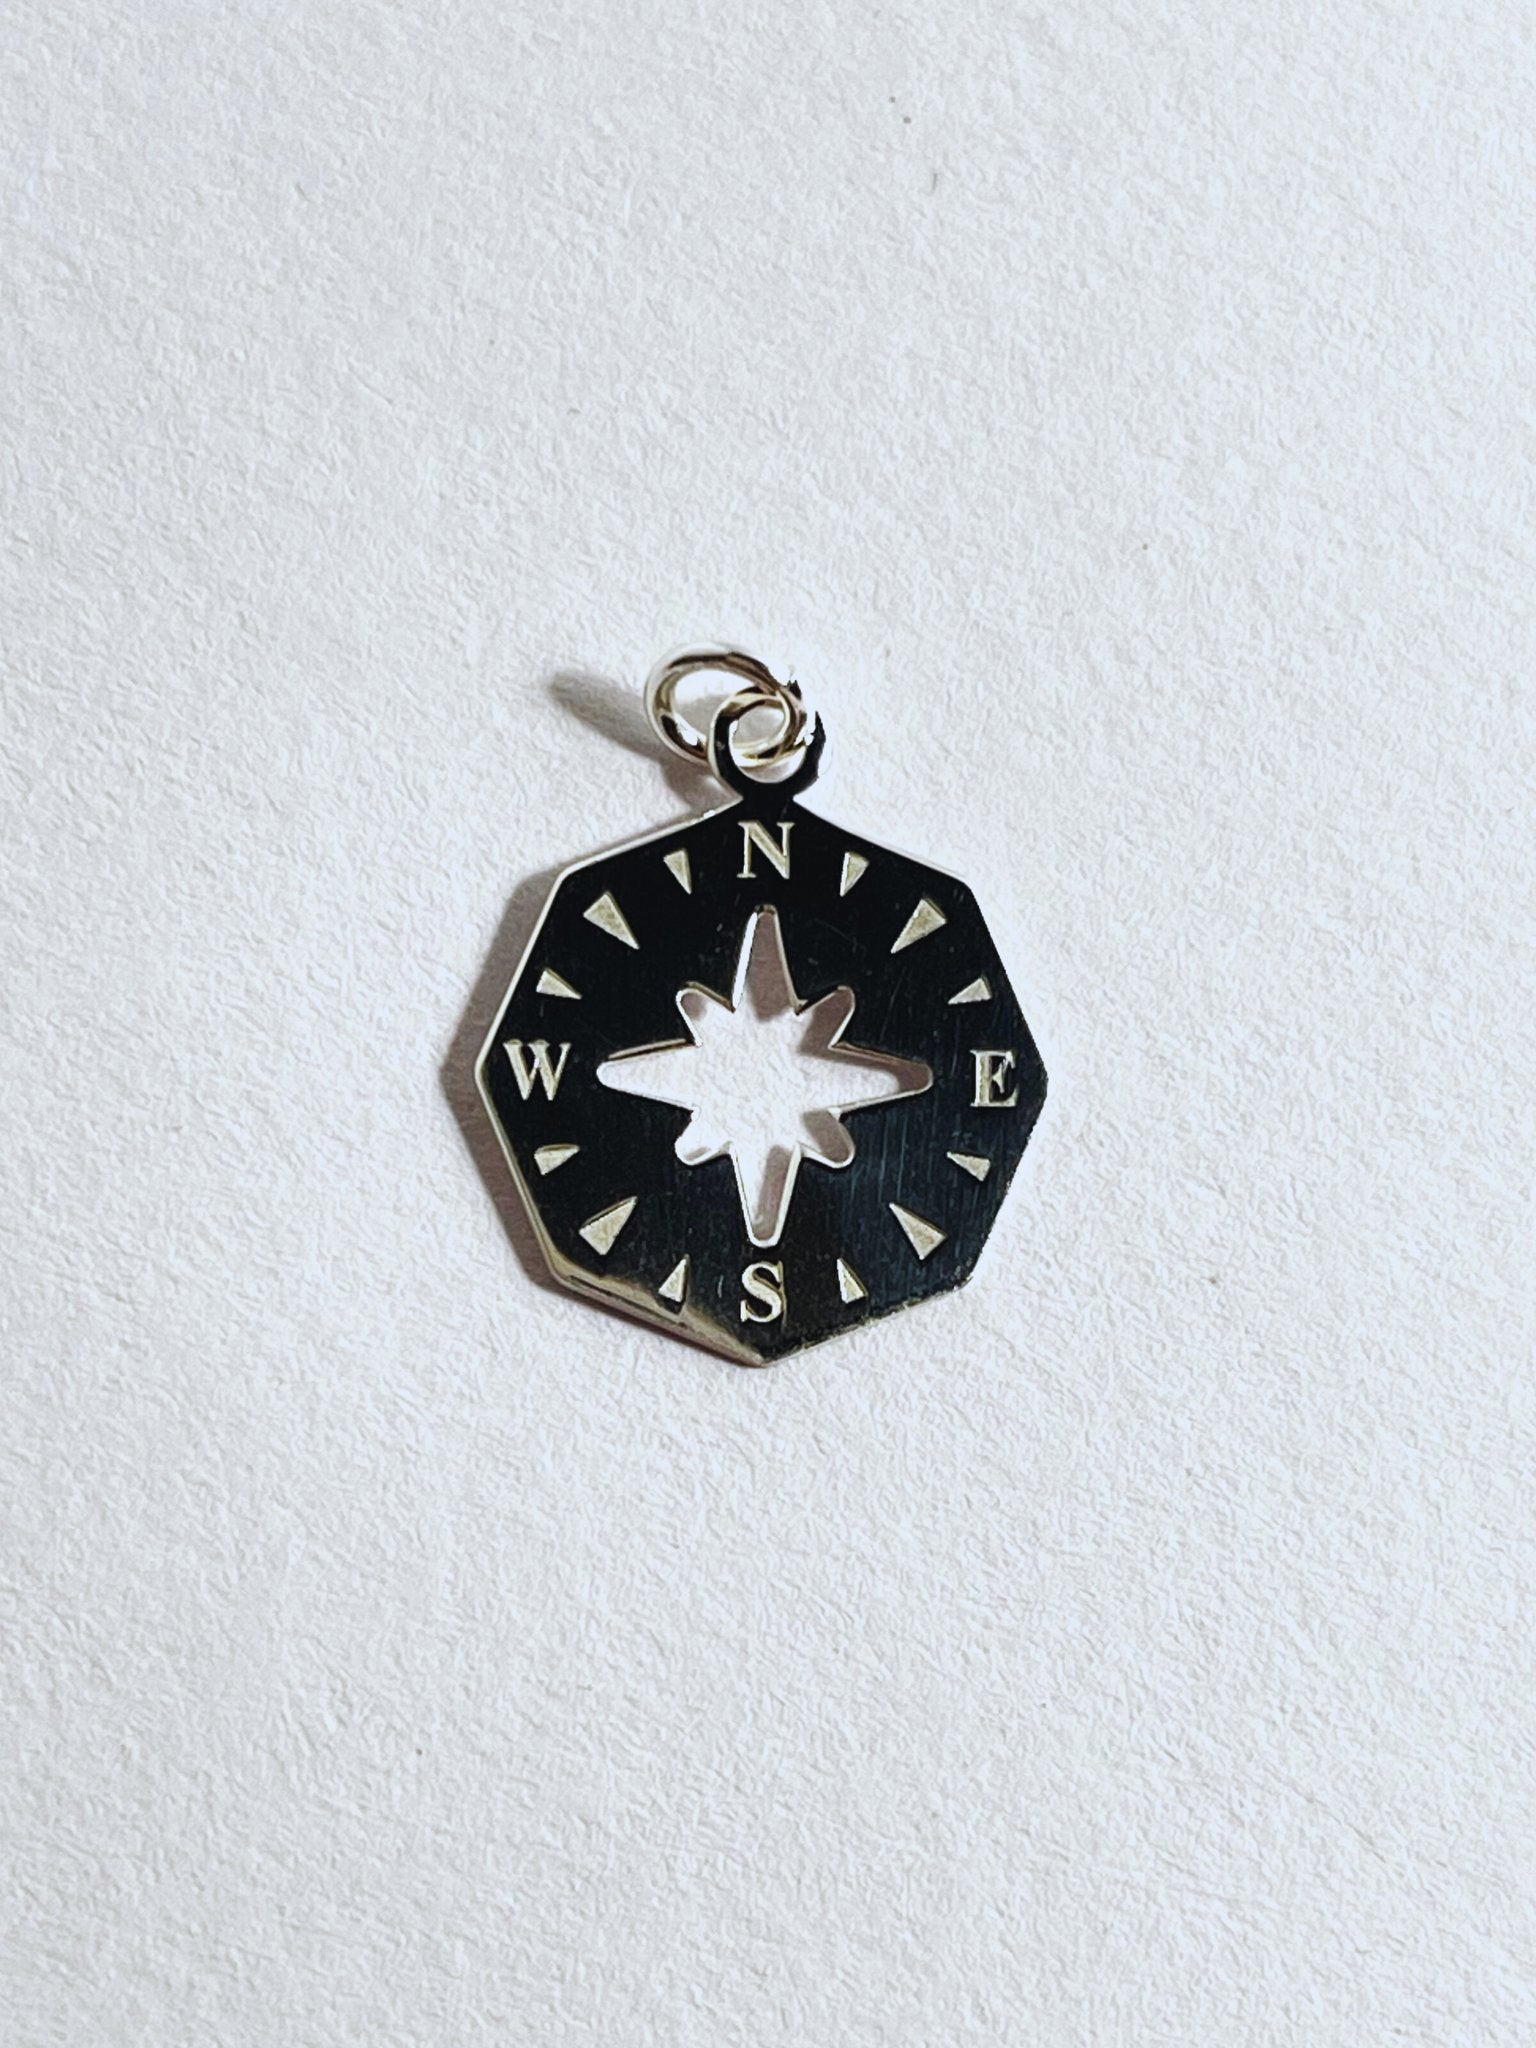 Sterling Silver North Star Compass Charm - Stellify